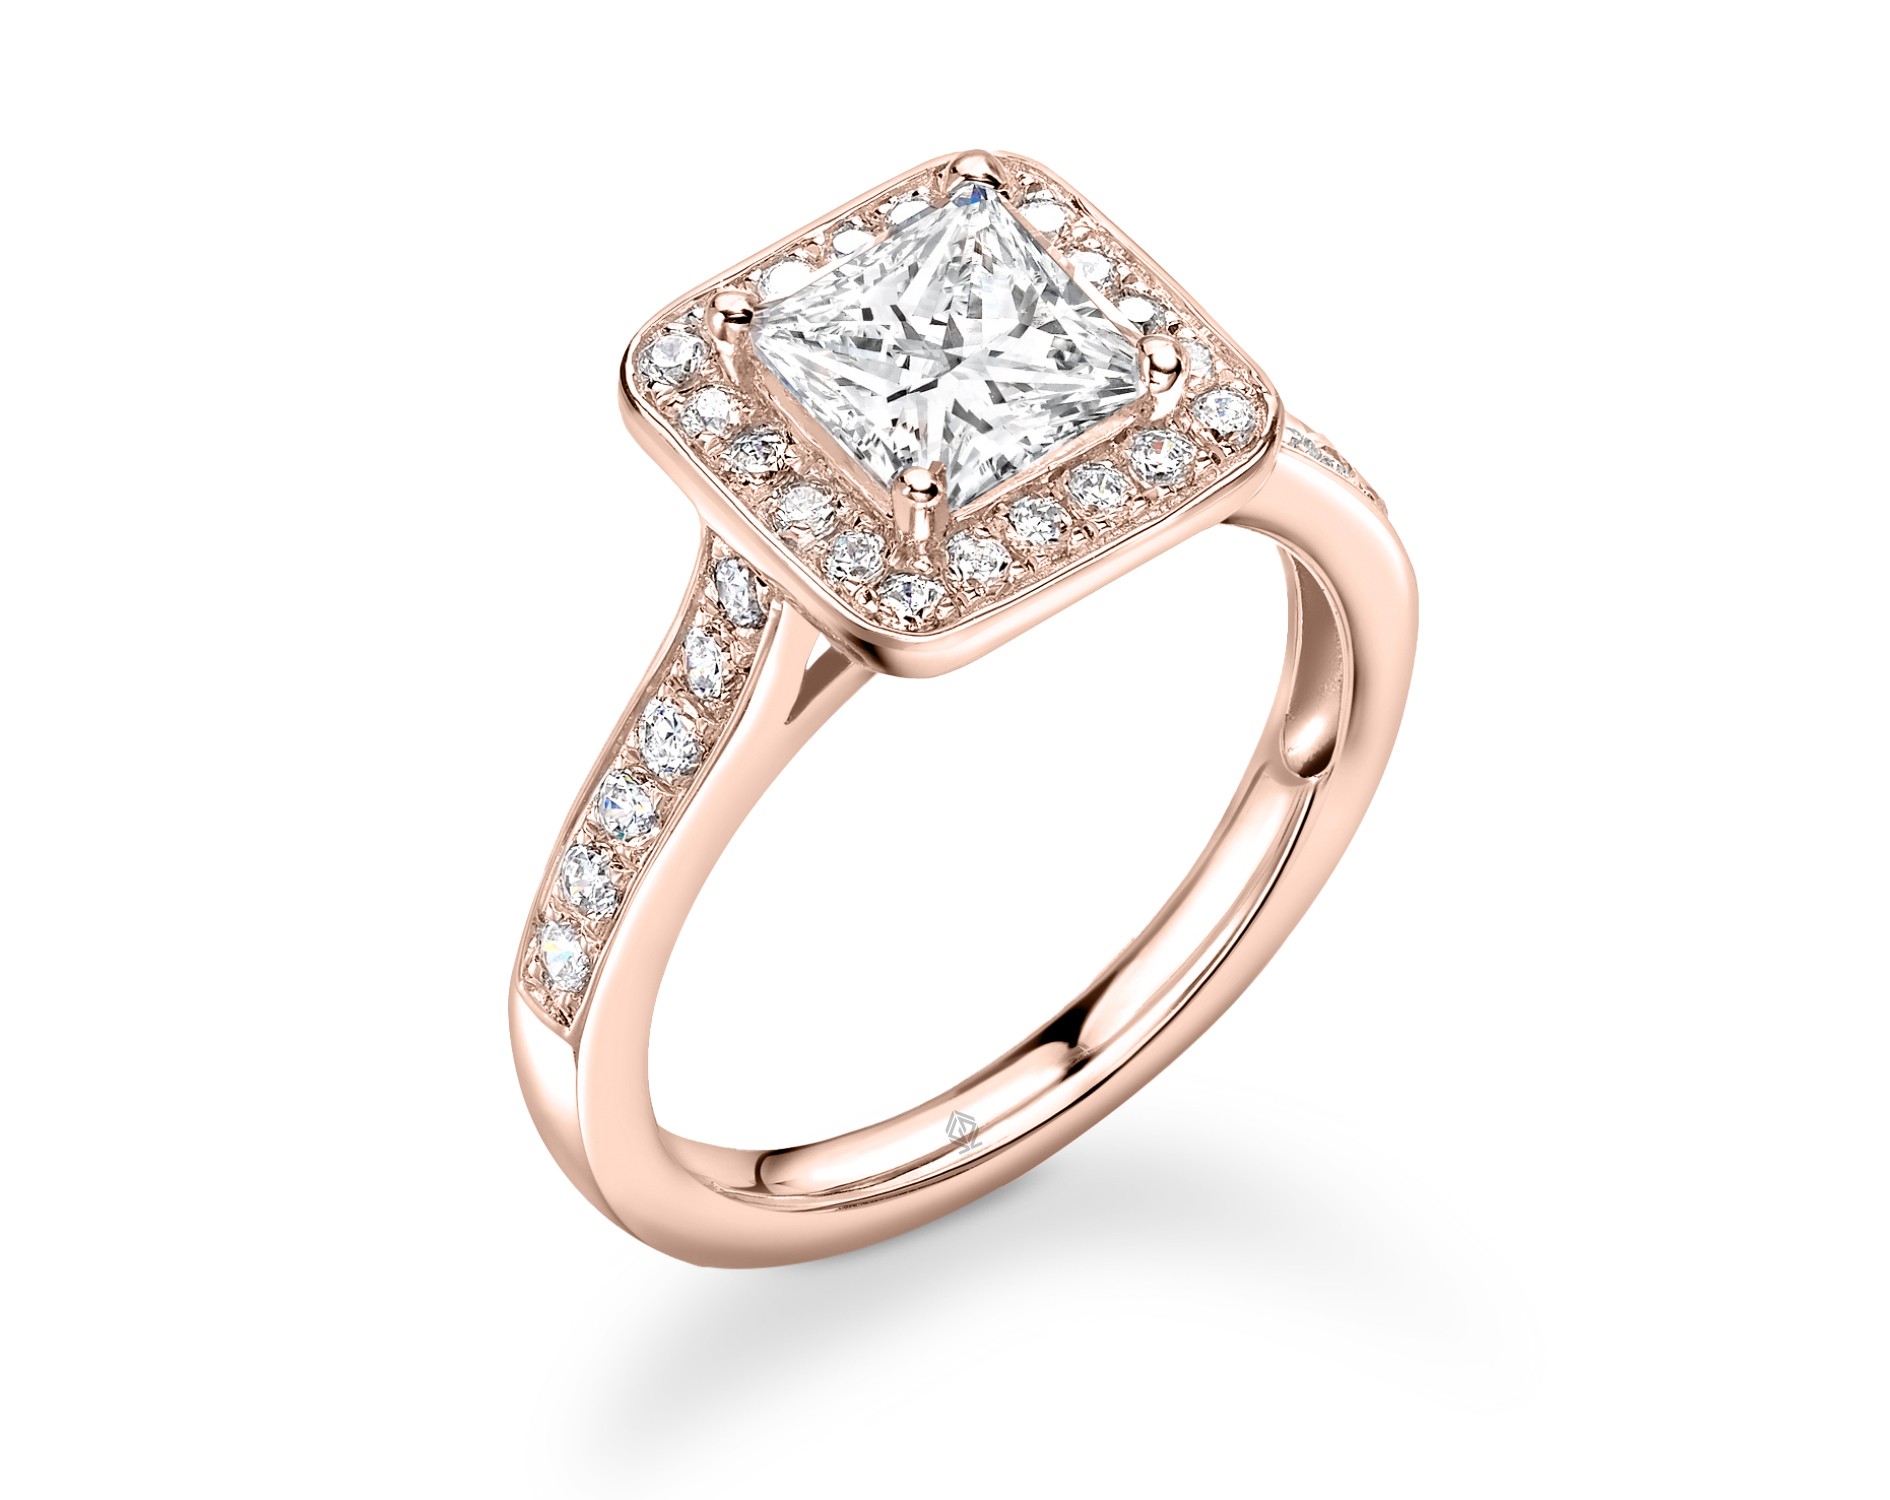 18K ROSE GOLD PRINCESS CUT HALO DIAMOND ENGAGEMENT RING WITH SIDE STONES CHANNEL SET